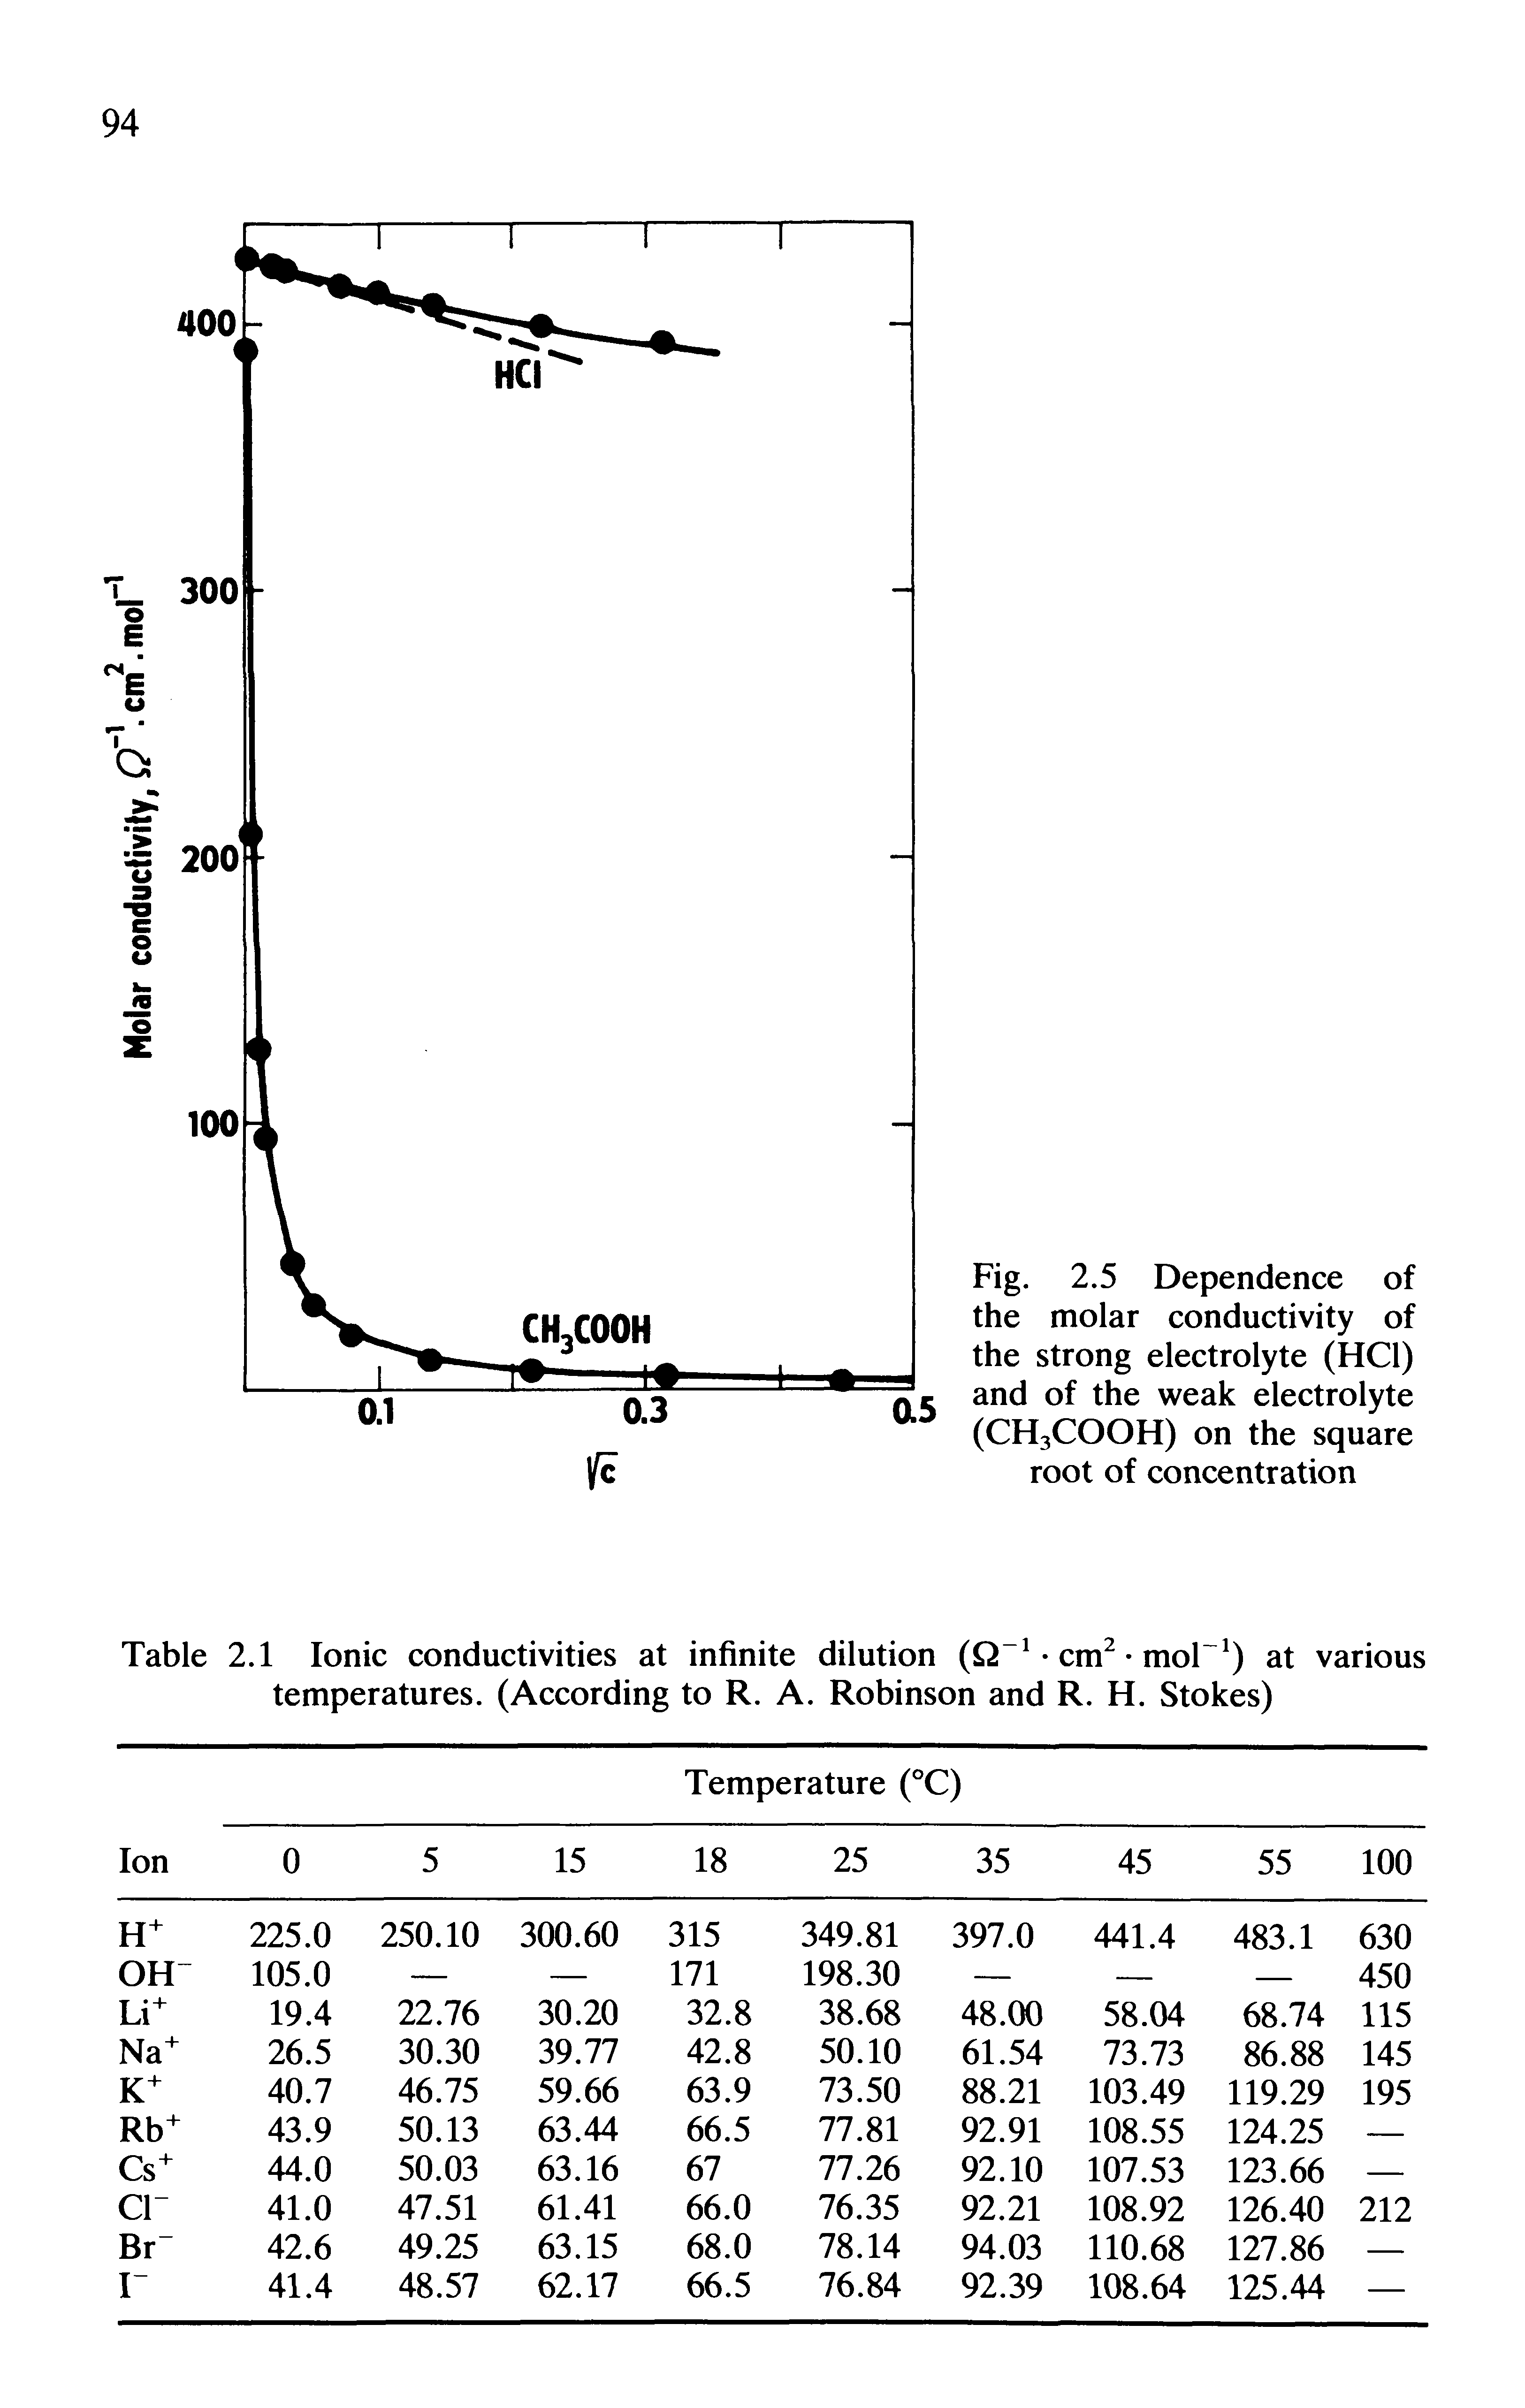 Fig. 2.5 Dependence of the molar conductivity of the strong electrolyte (HC1) and of the weak electrolyte (CH3COOH) on the square root of concentration...